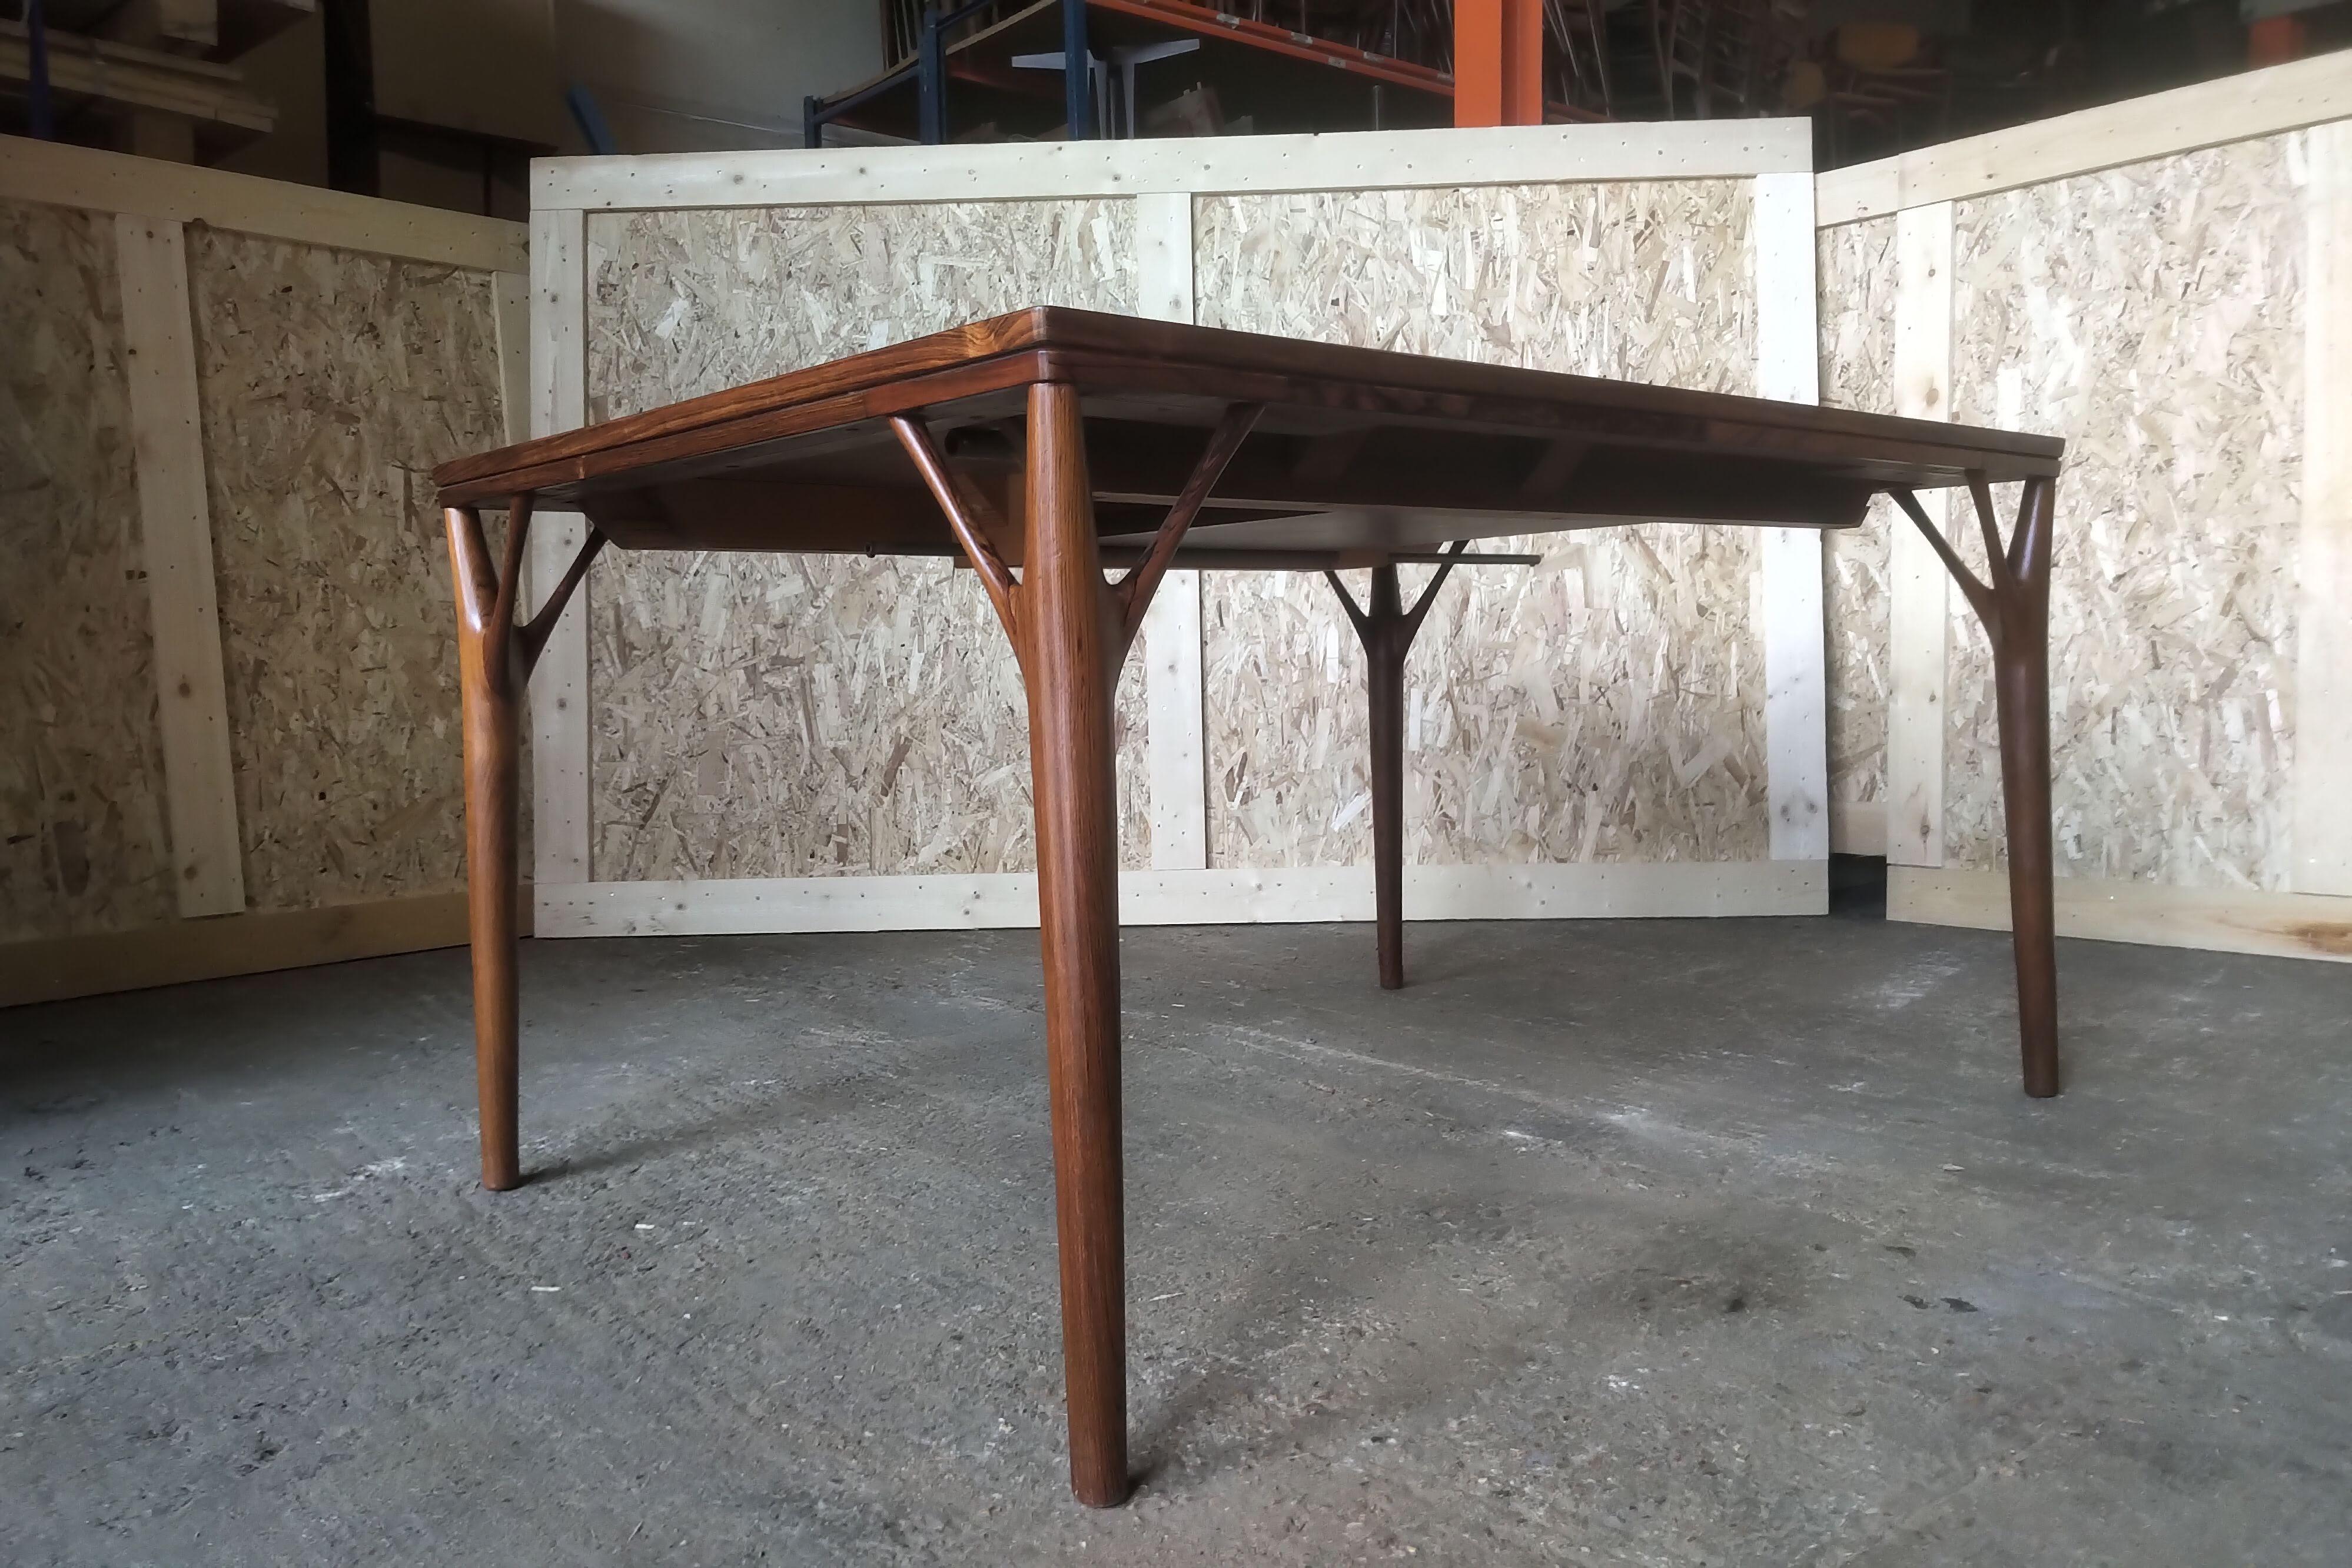 This table is 190cm long when extended and 140cm long when butterfly extension leaf is folded under the table top. All surfaces have been lightly sanded to even out any variation in colour between the main halves and the extension leaf. All surfaces